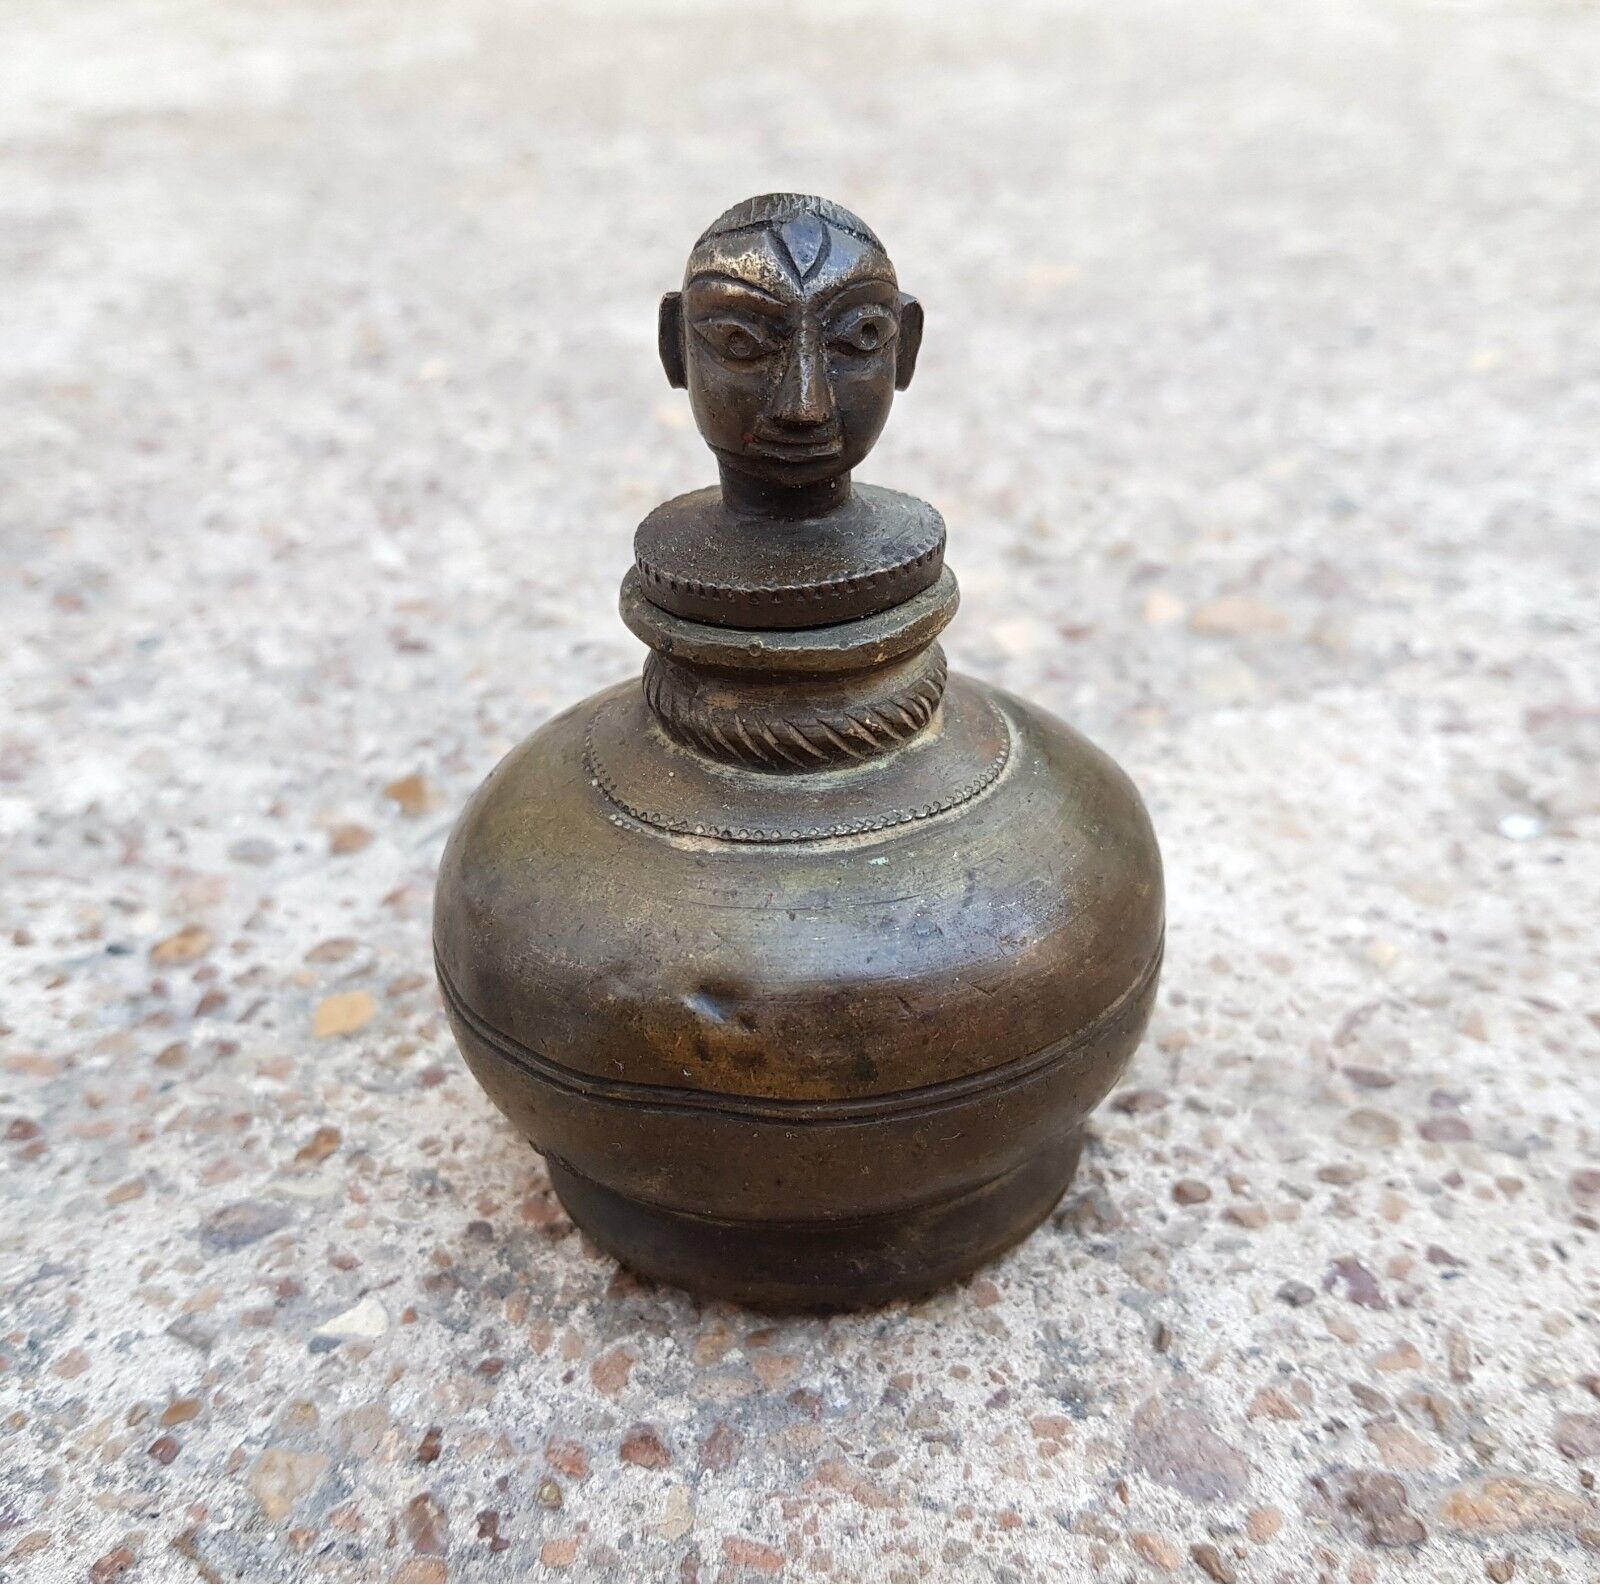 Vintage Beautiful Handmade Brass Holy Water Pot With Buddhas Face On Top